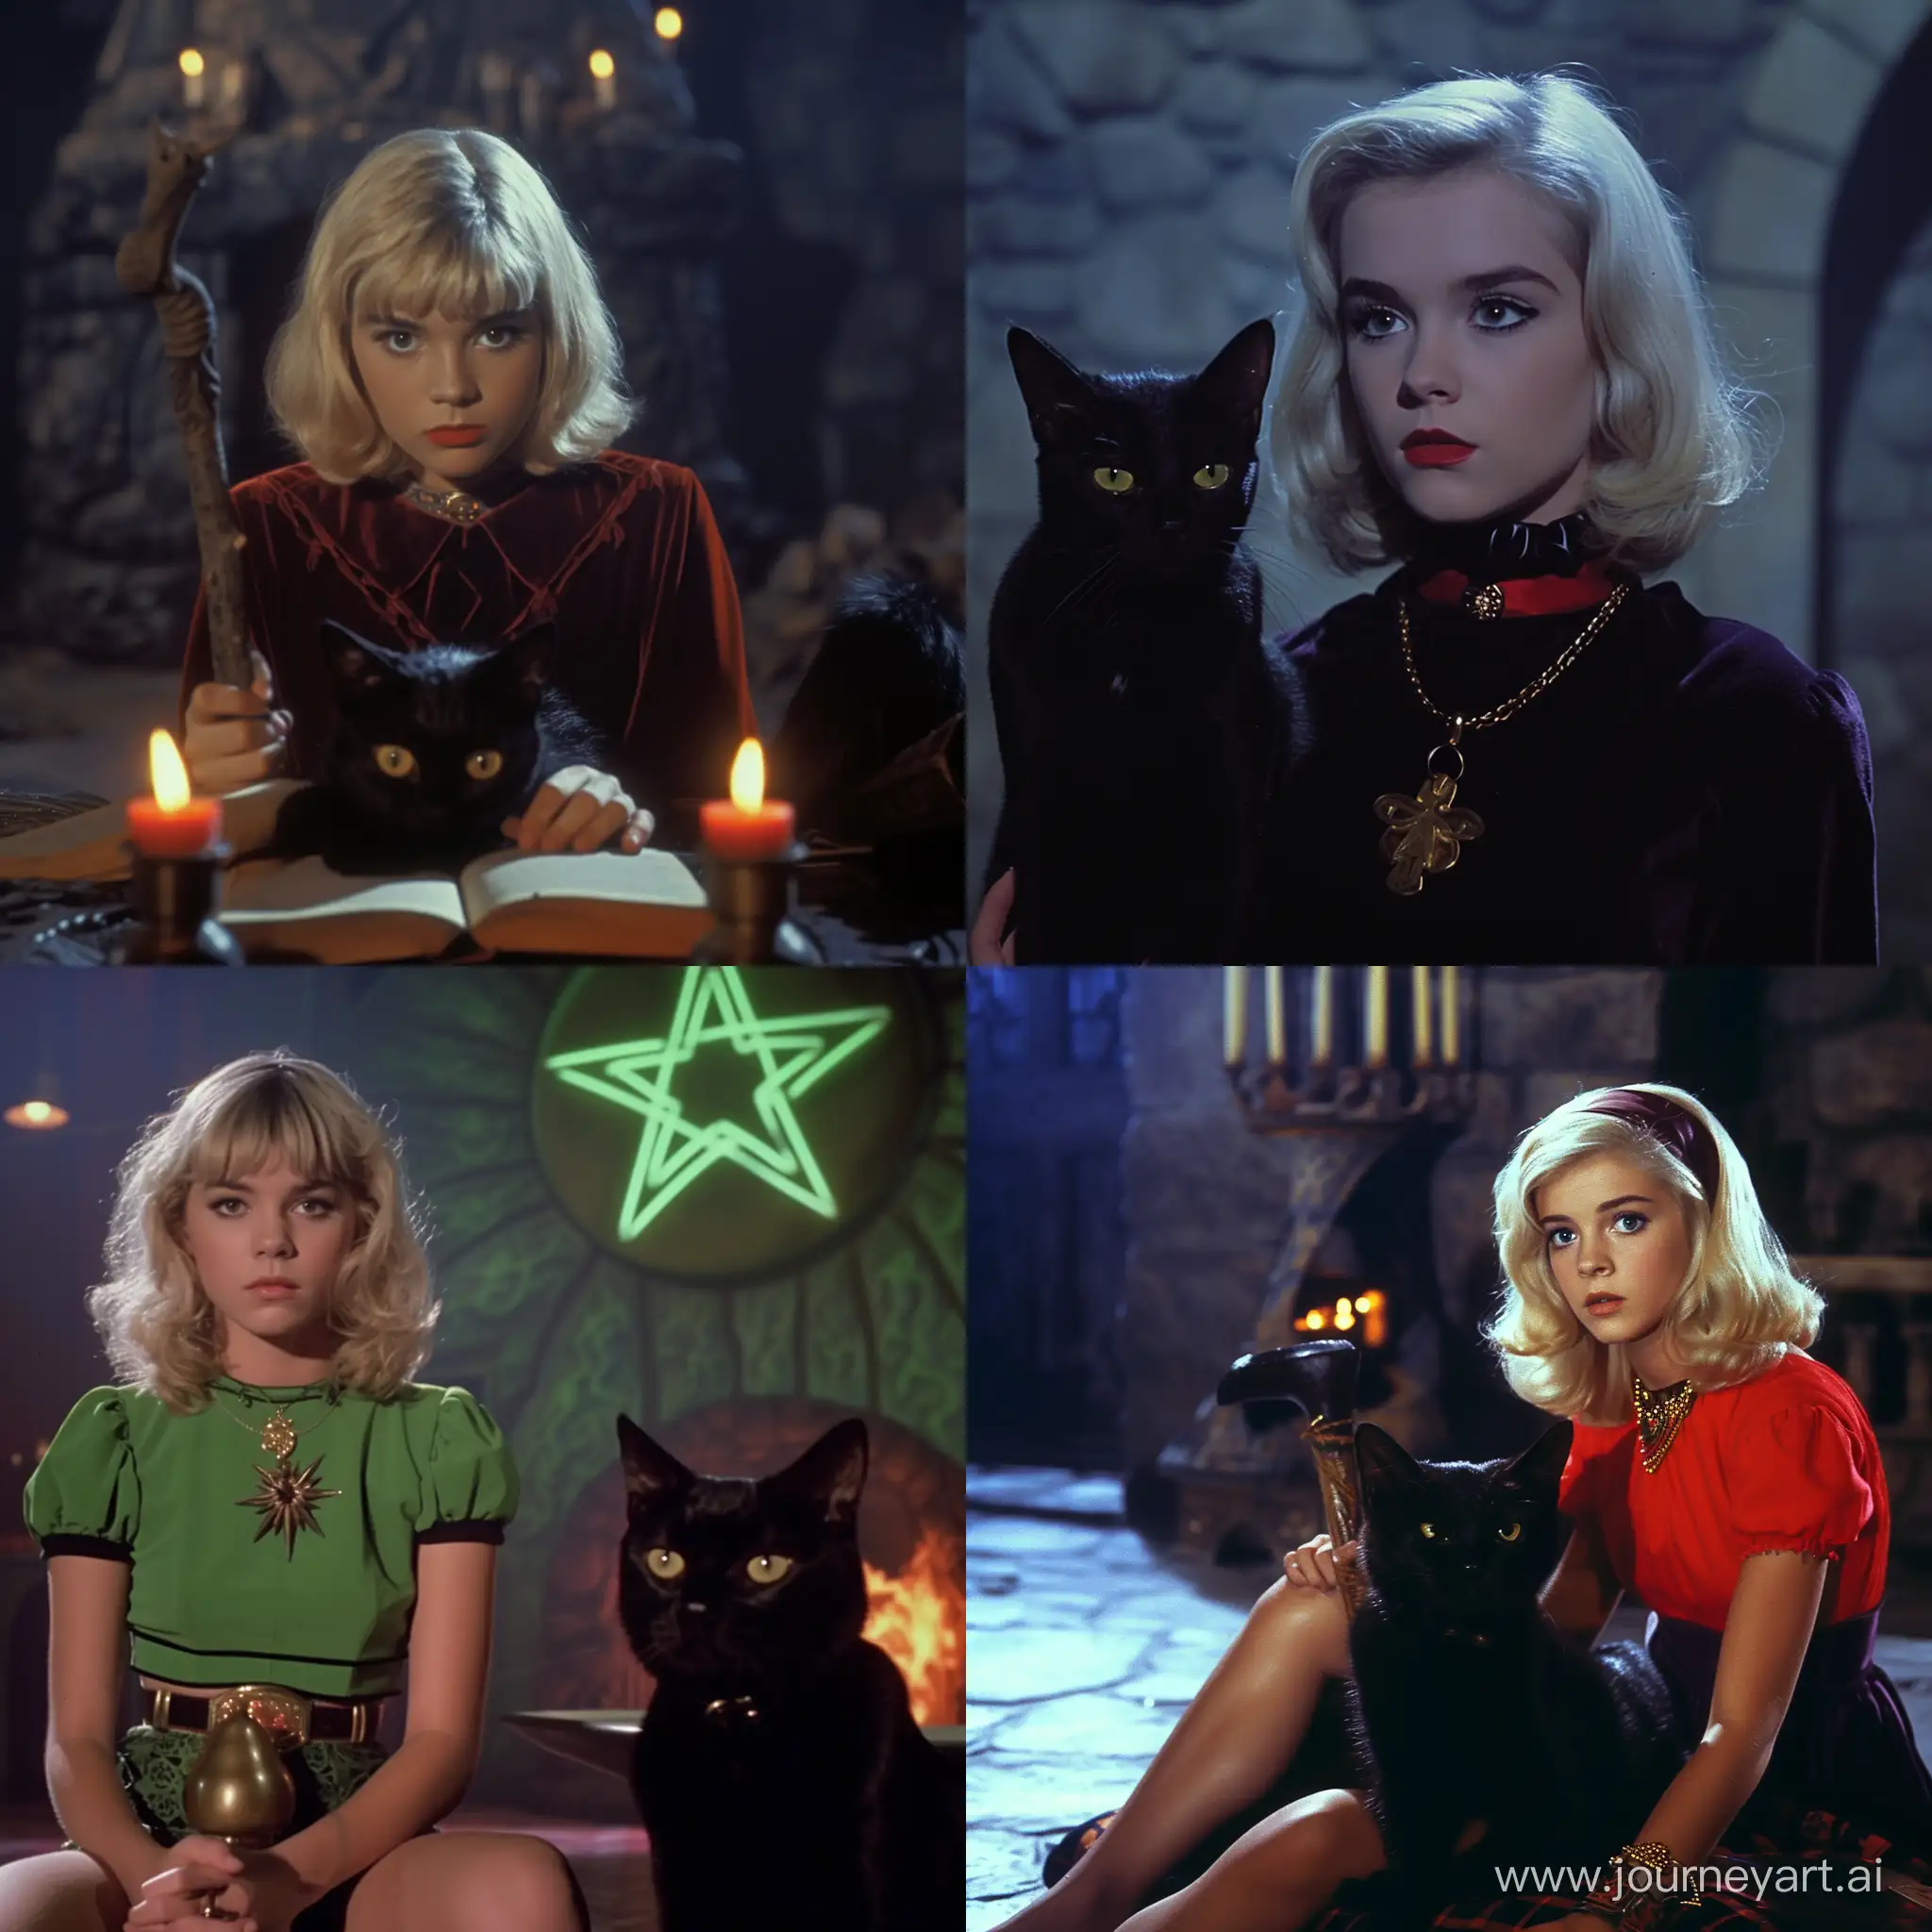 Sabrina the teenage witch and salem, screenshot from excalibur 1981